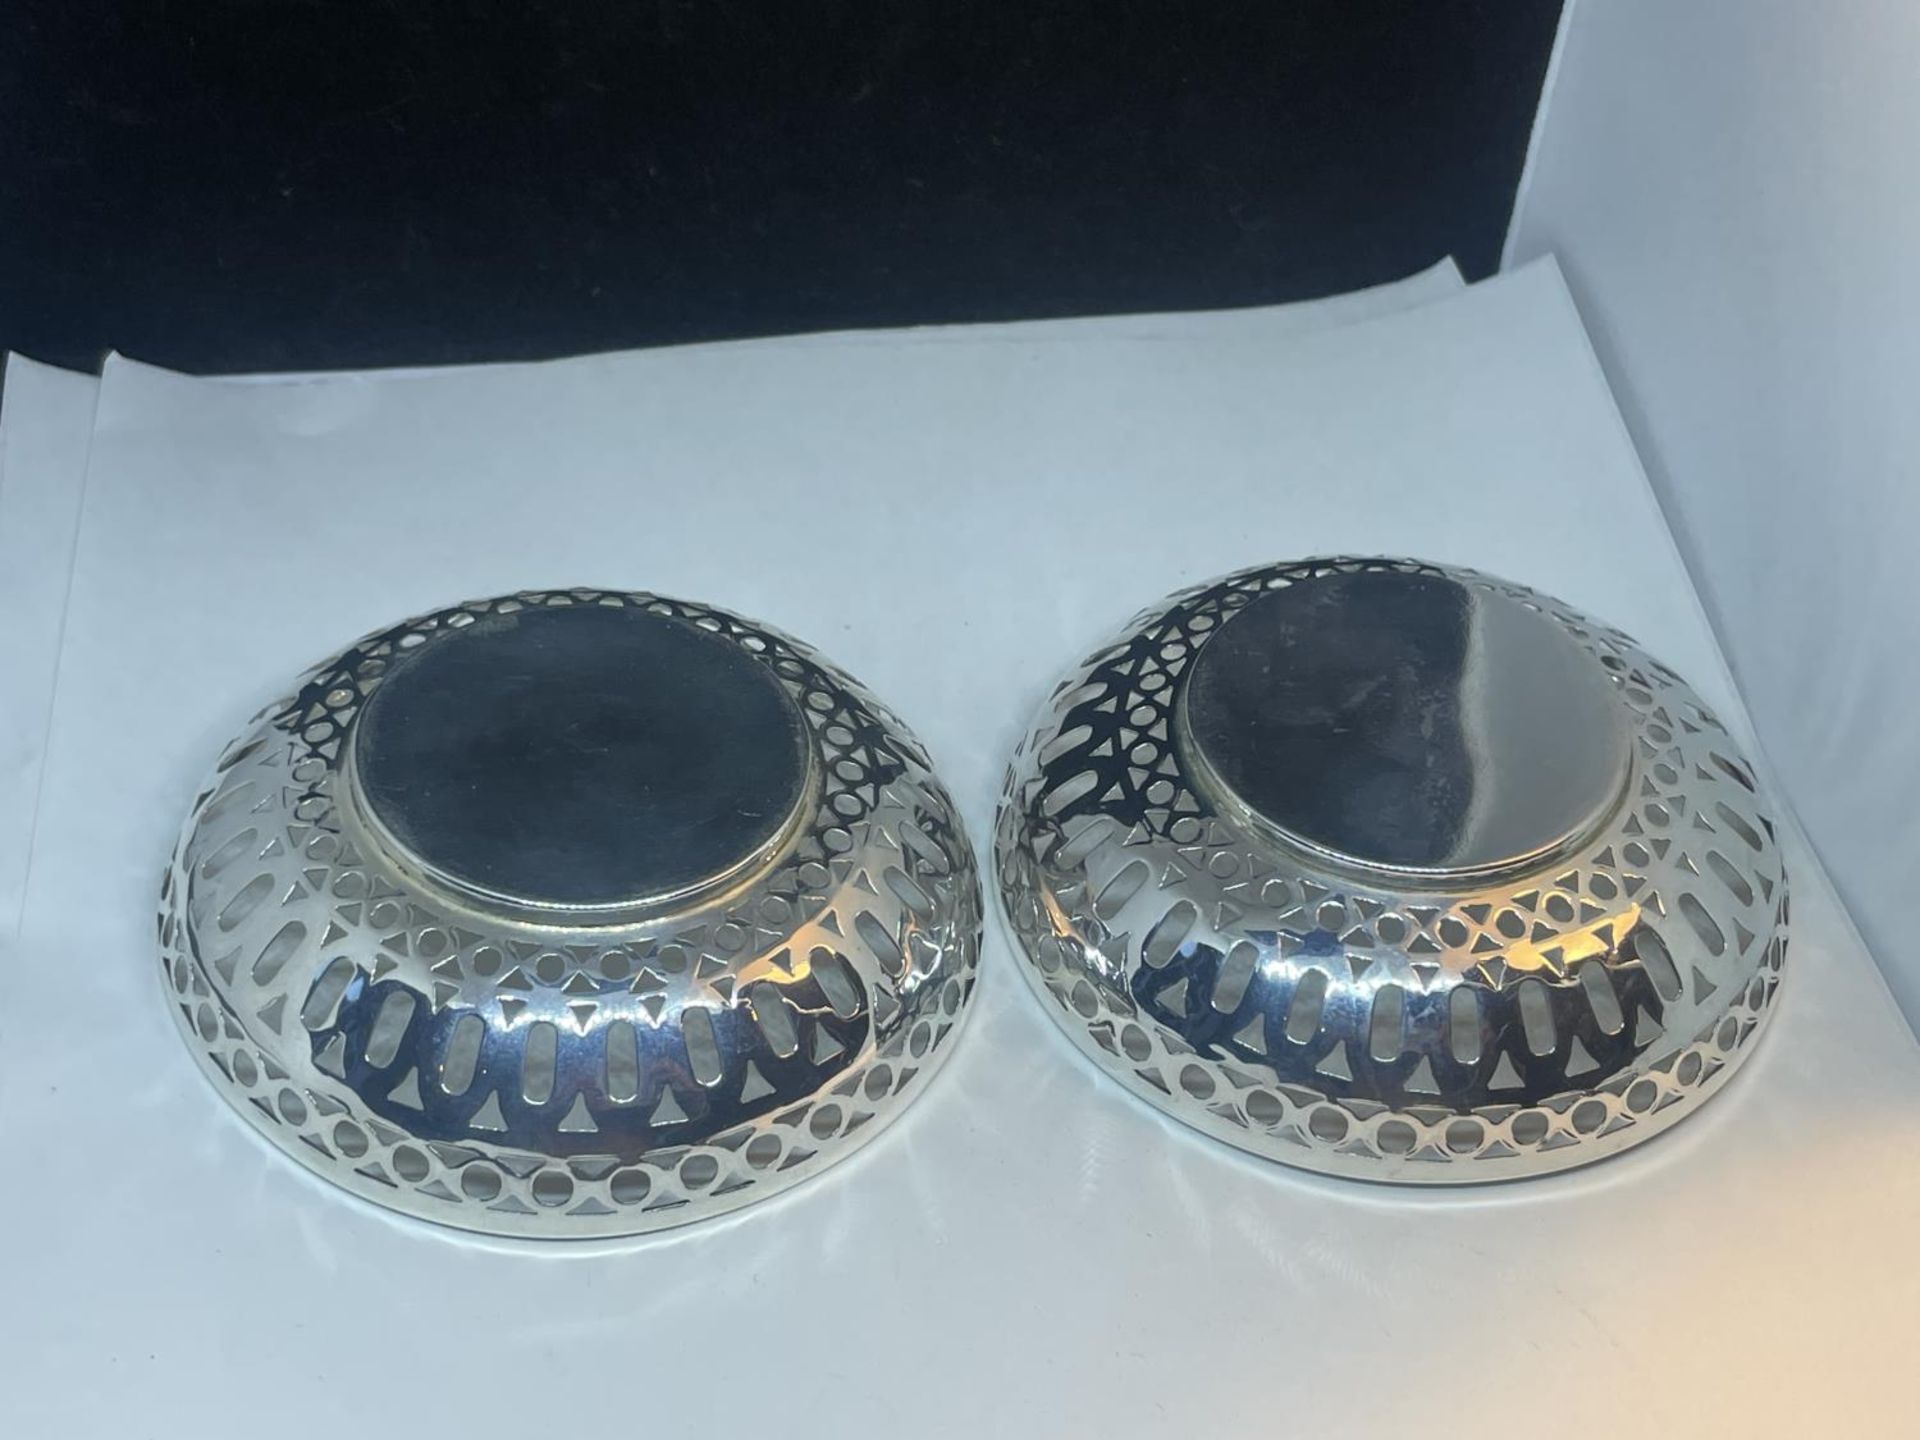 A PAIR OF HALLMARKED SHEFFIELD SILVER PIERCED DISHES - Image 5 of 5